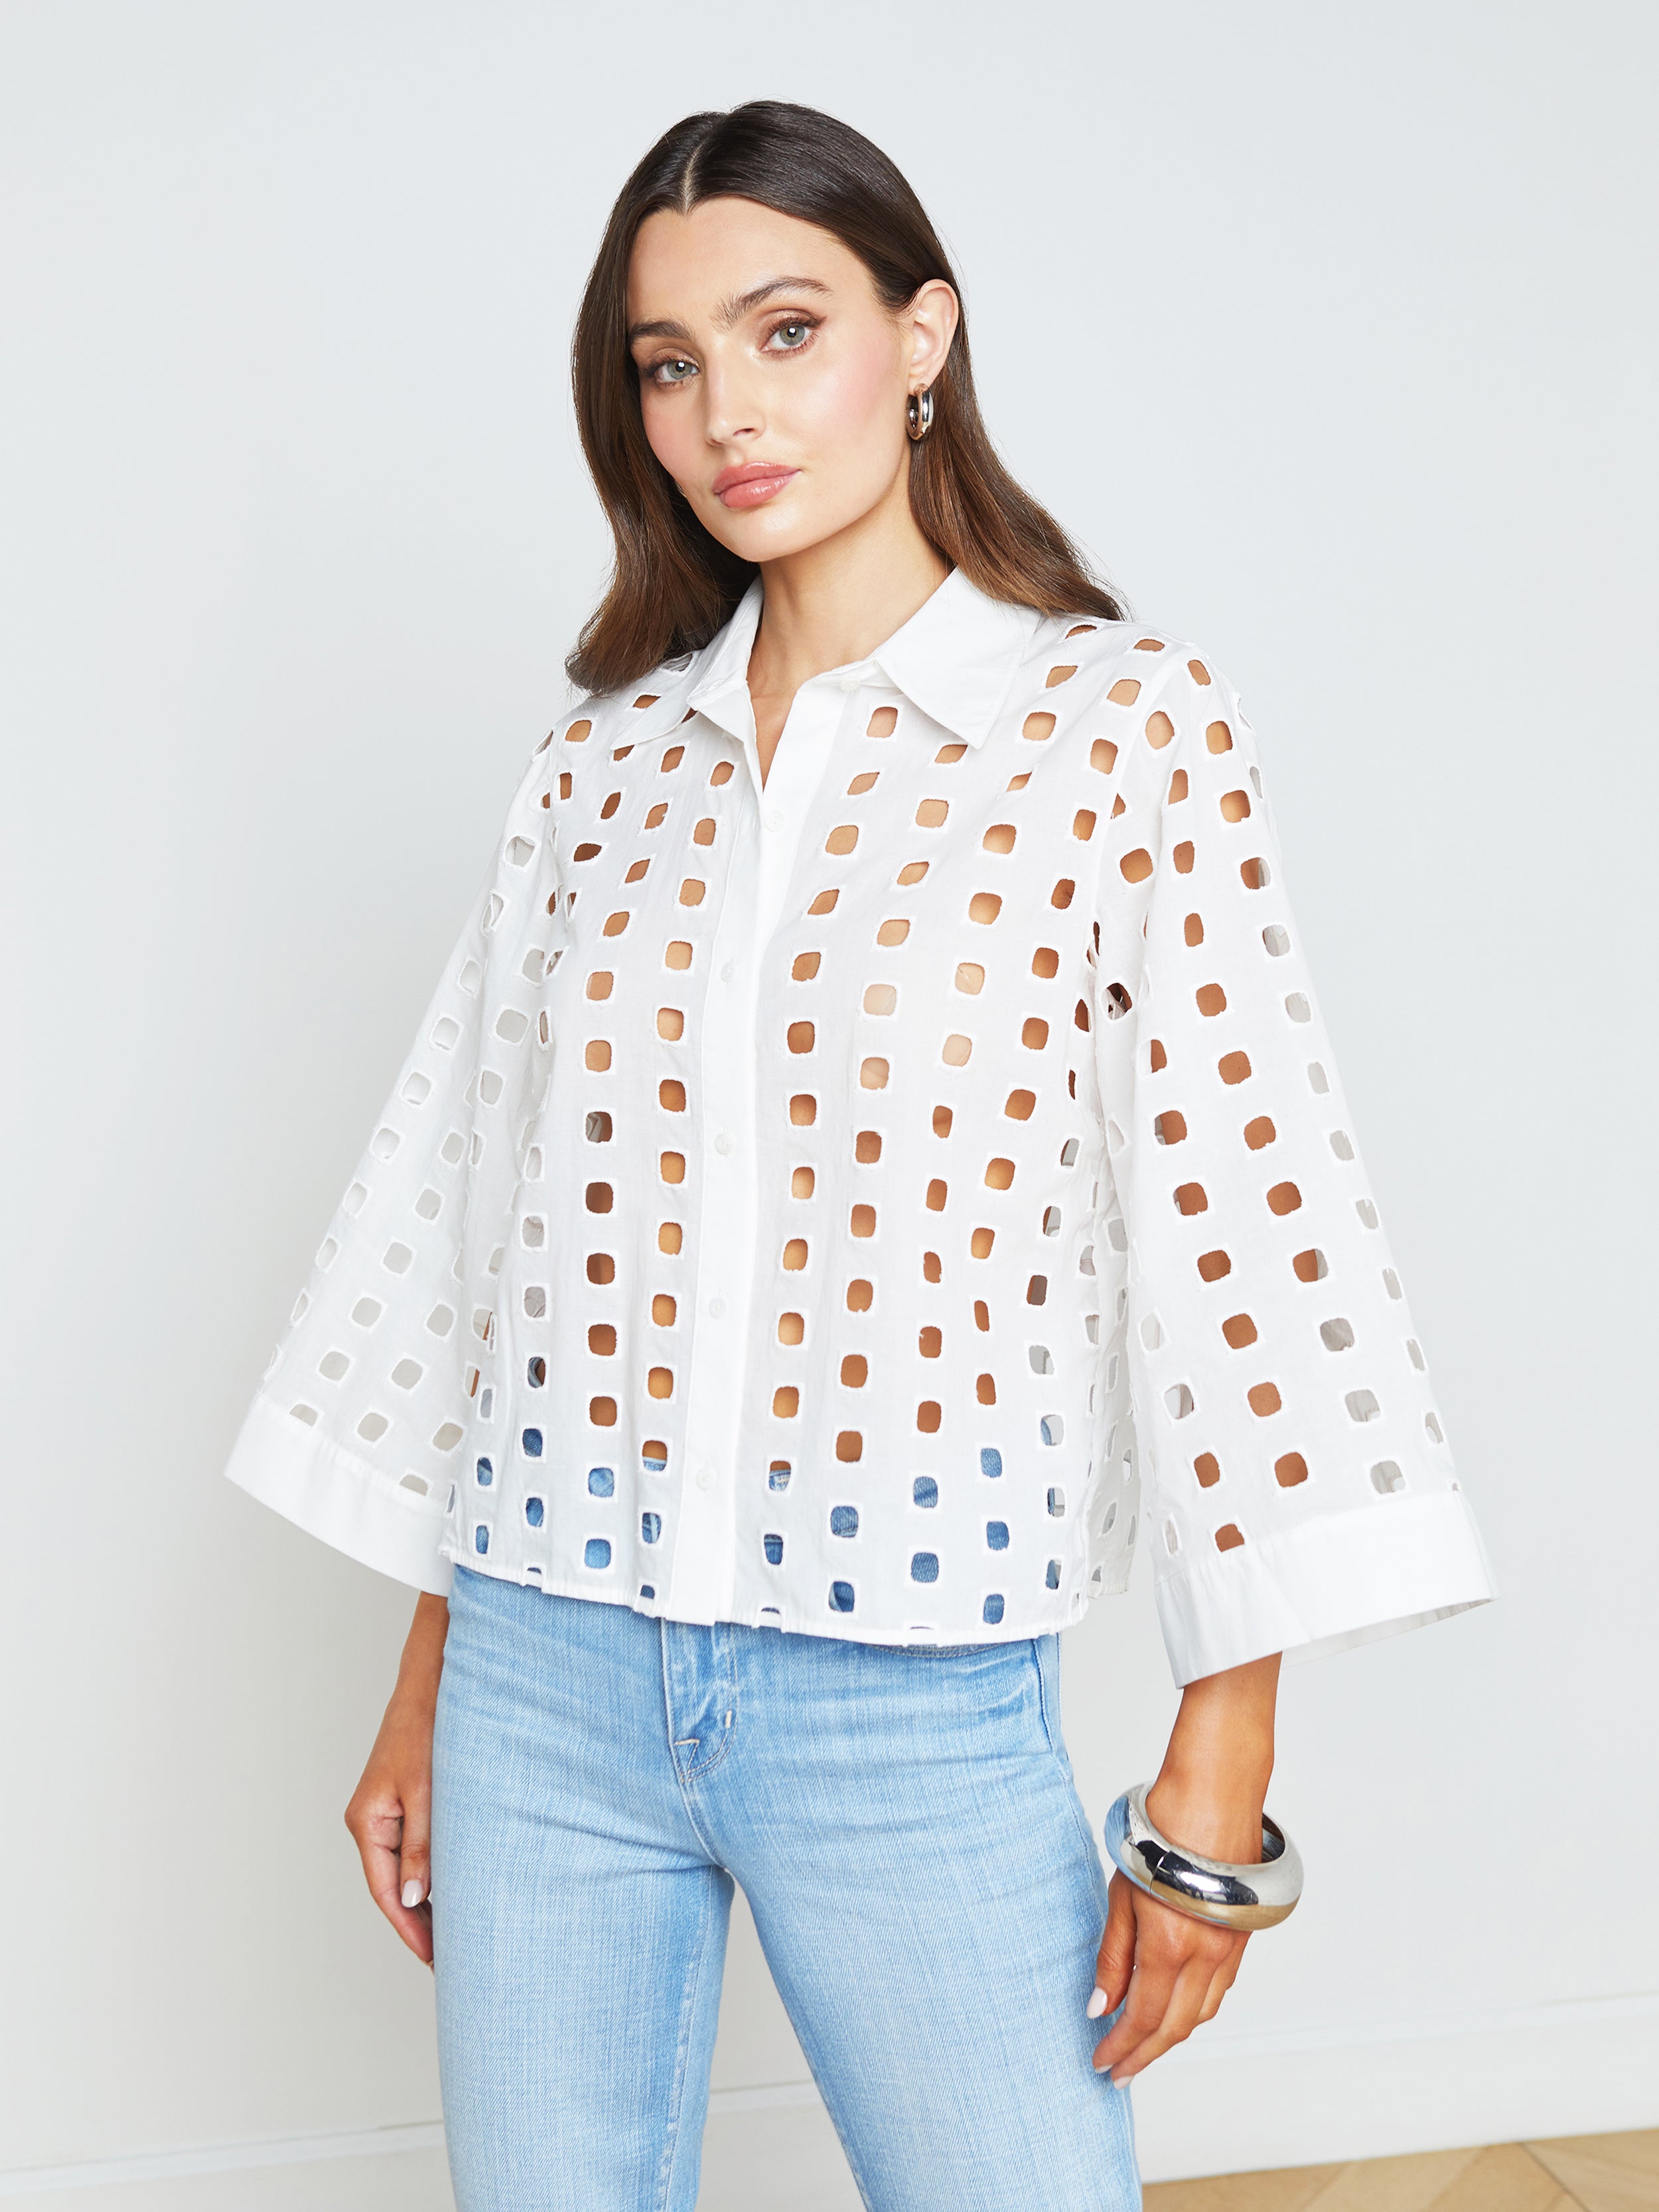 Featured: Breslin Eyelet Blouse